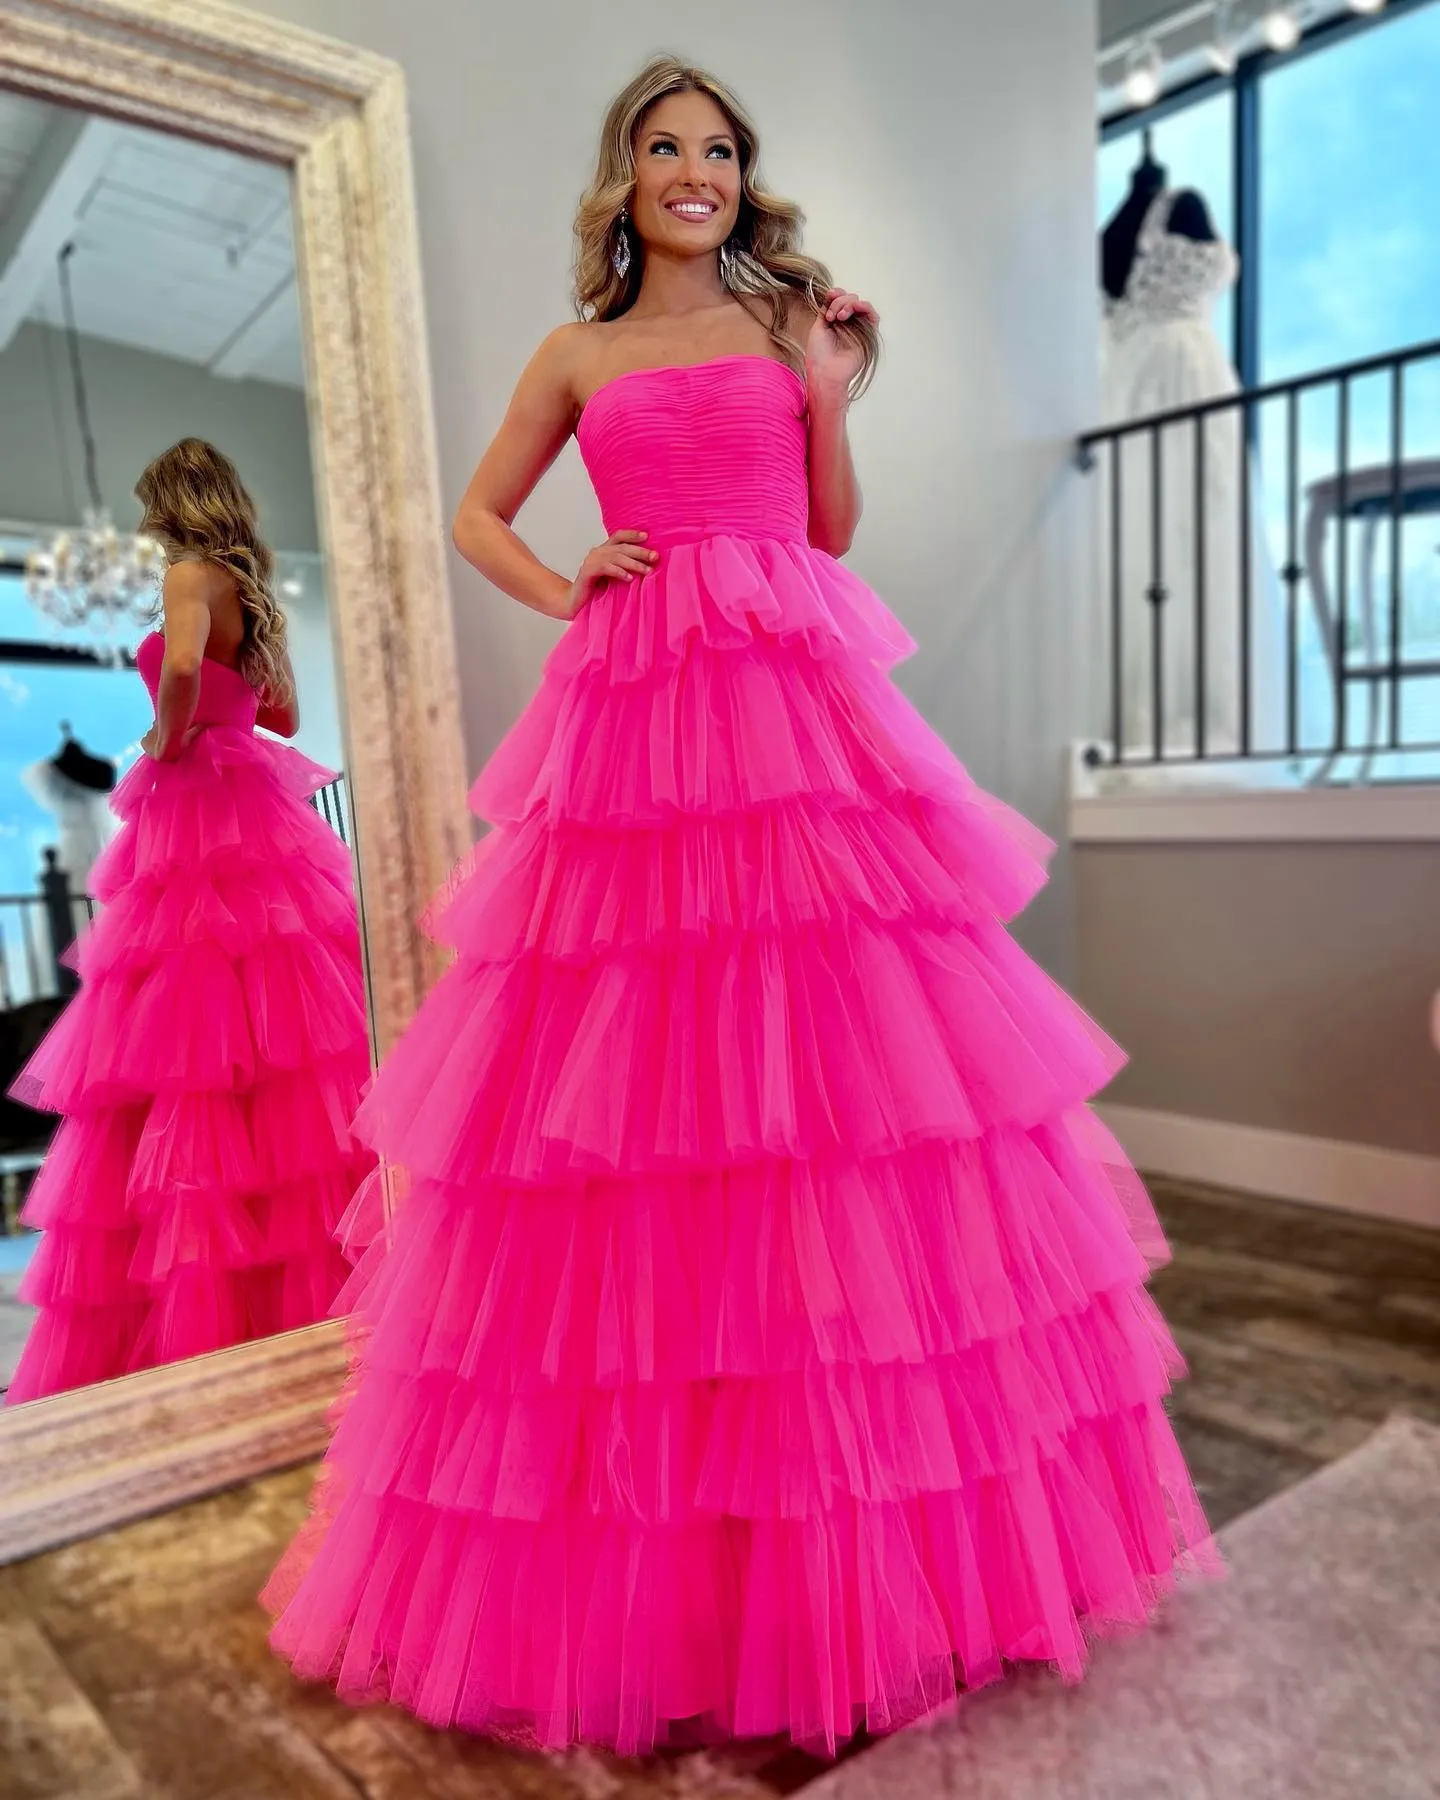 Red Capet Runway Strapless Tulle Tiered Tulle Prom Dress With Multi Layer  Ruffle Ballgown For Lady Preteen Girl Pageant, Formal Evening Party,  Wedding Guest, Quince Red Ruched Bustier 2023 Collection From  Uniquebridalboutique,